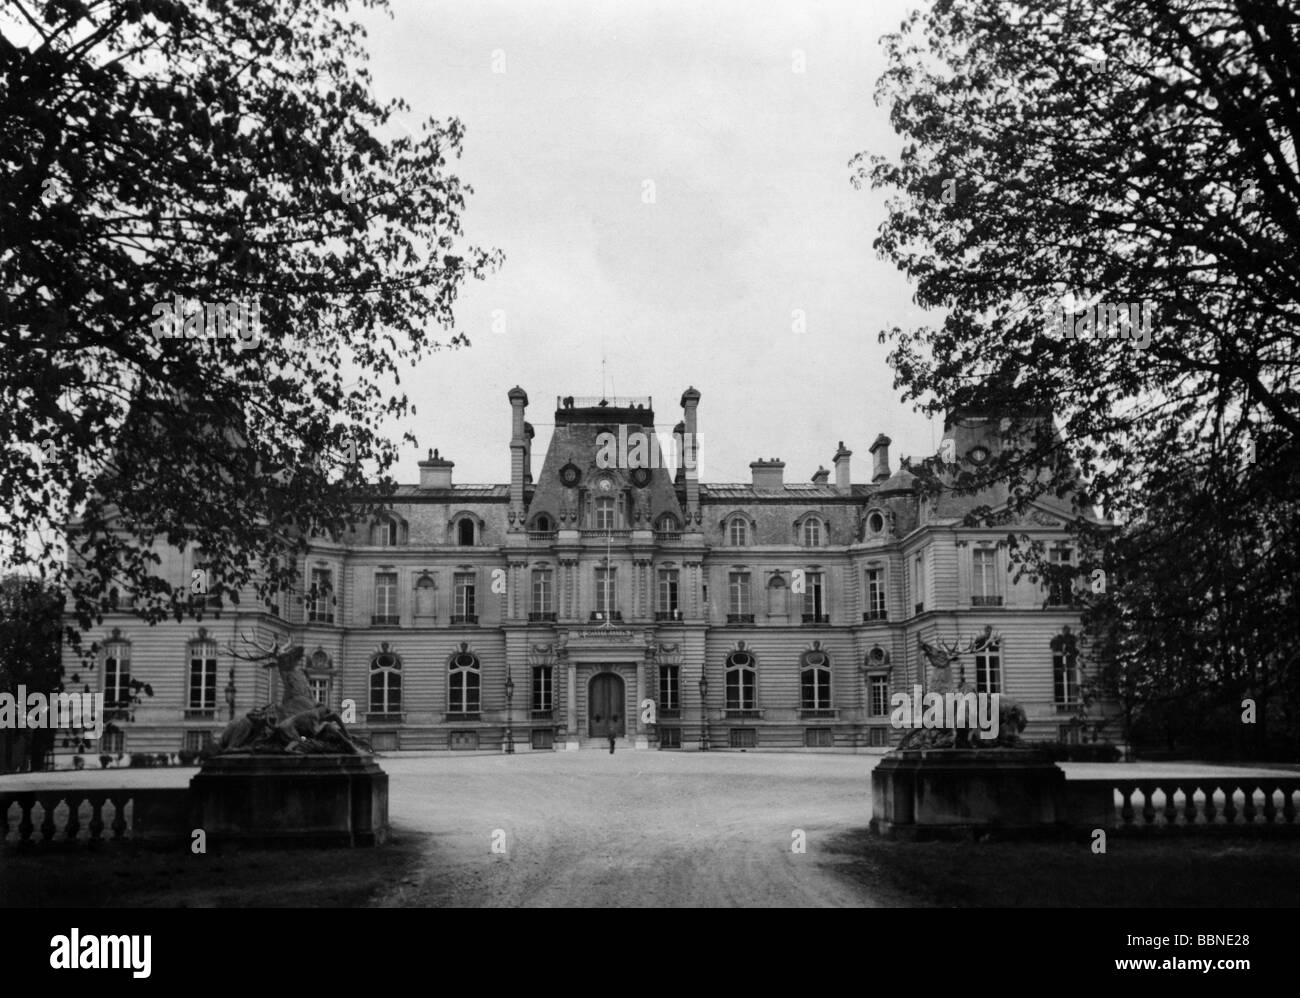 events, Second World War / WWII, France, German occupation, Chateau de Montvillargenne at Chantilly near Paris, 1942, Stock Photo